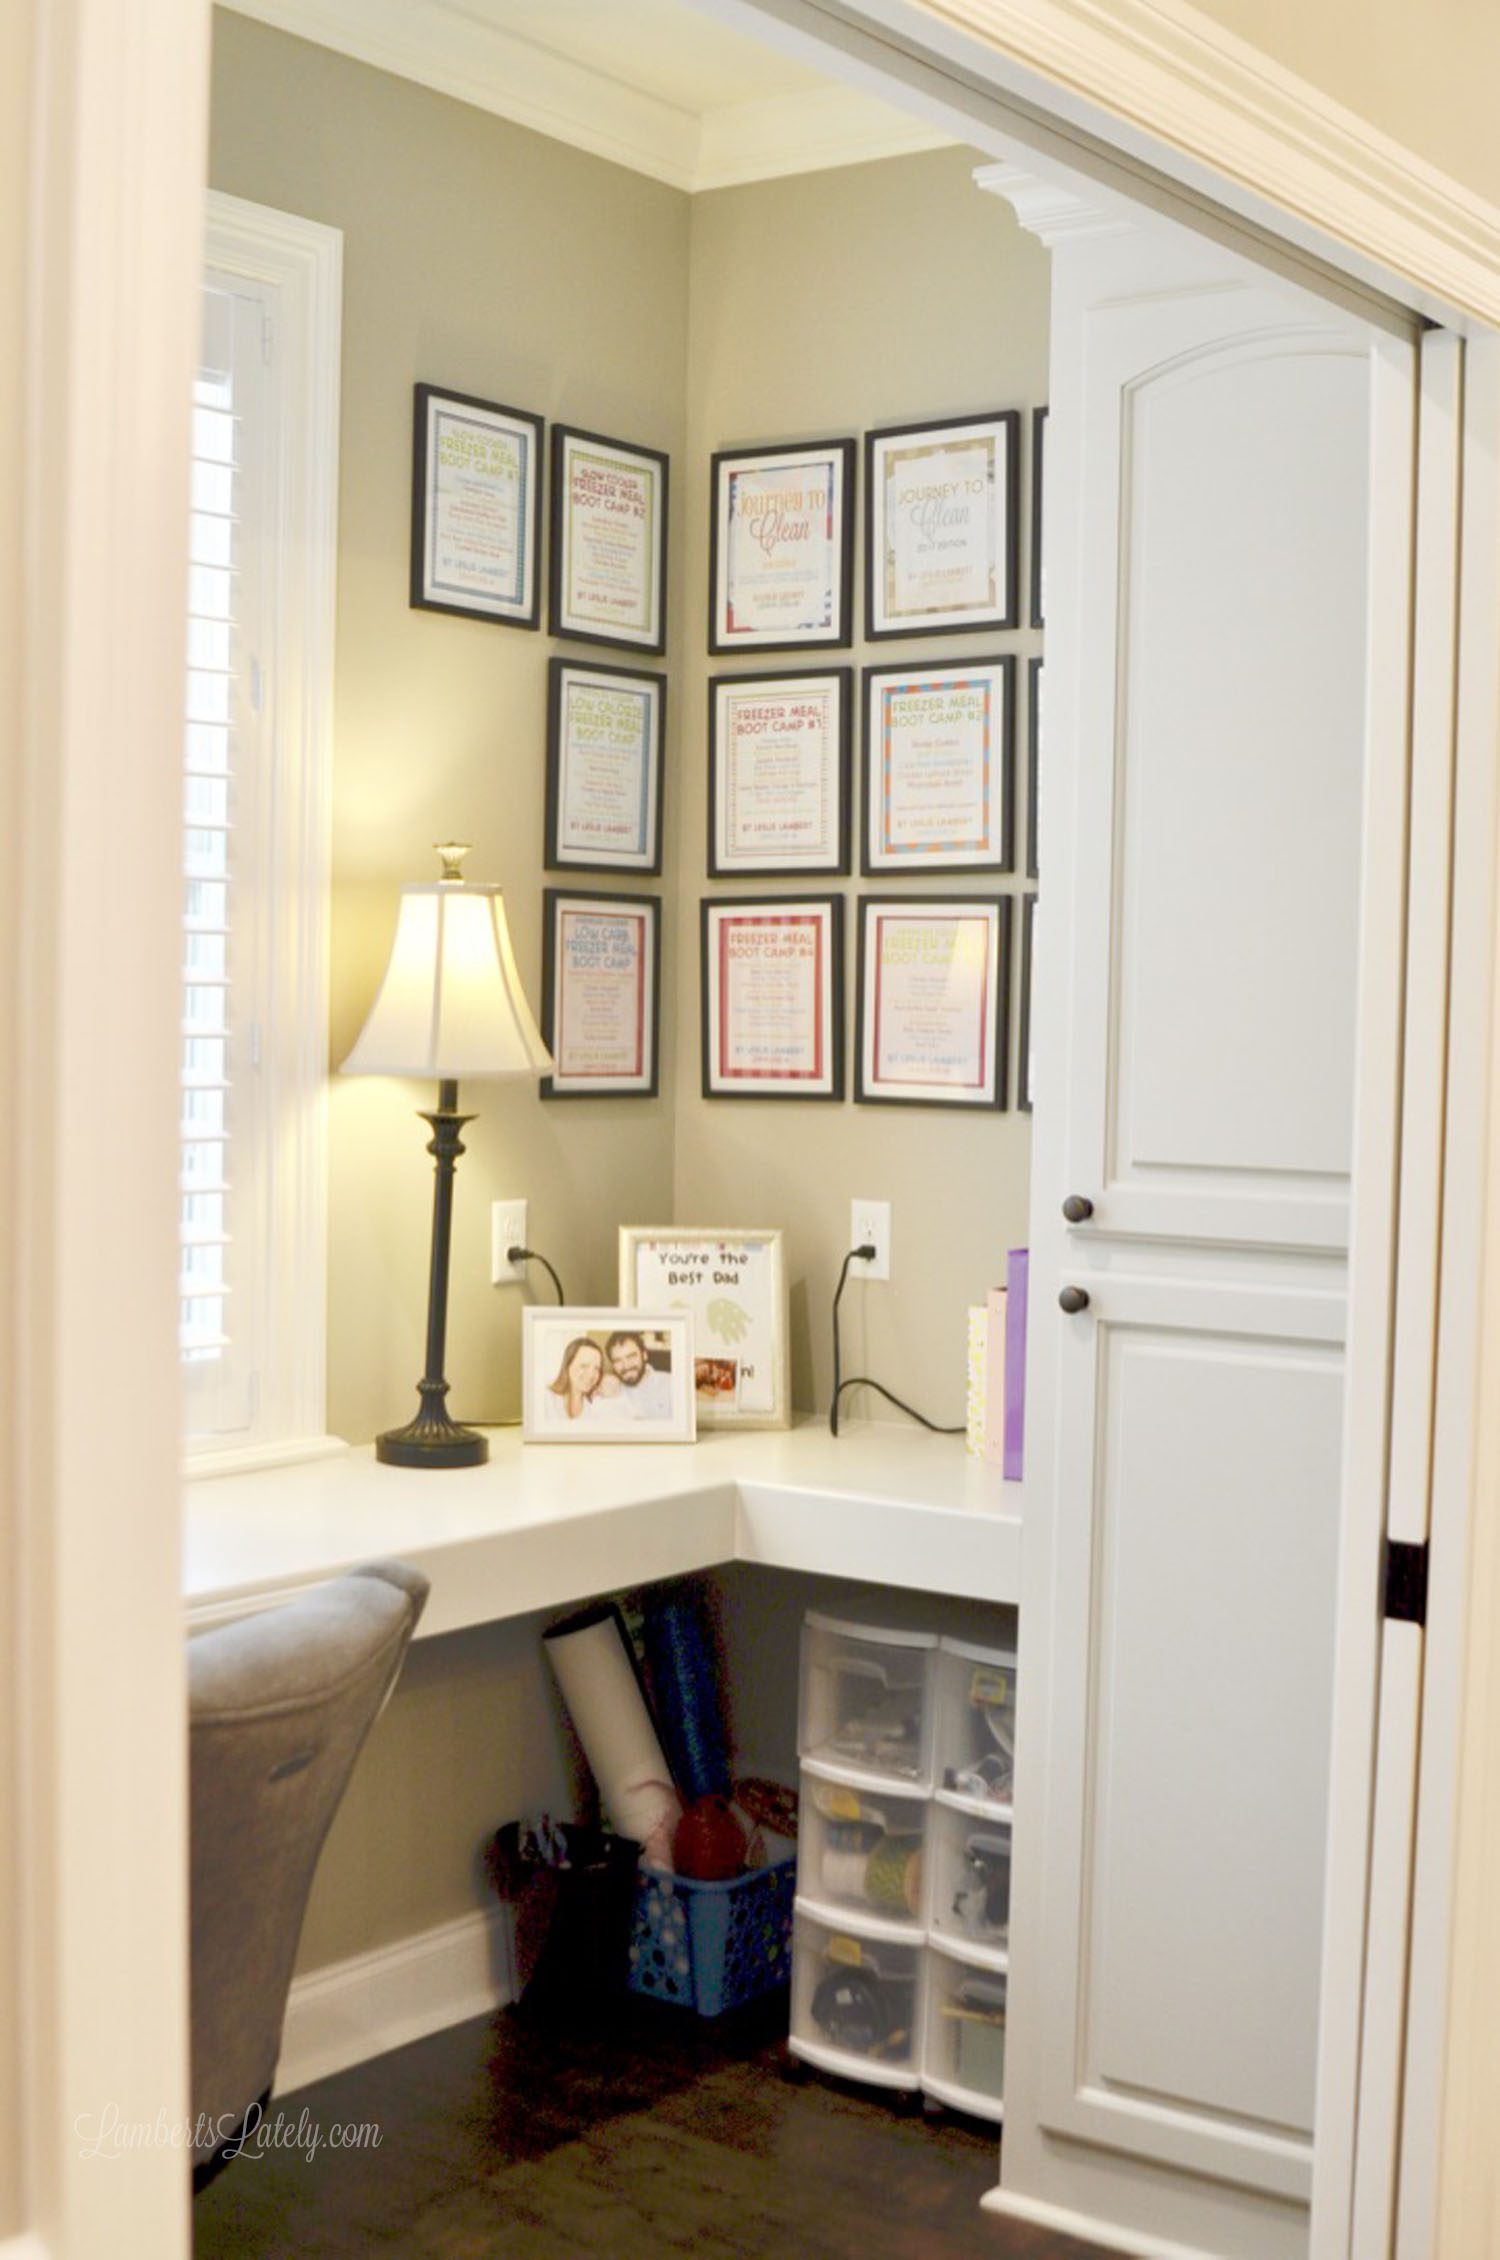 view inside of home office with framed book covers on wall.